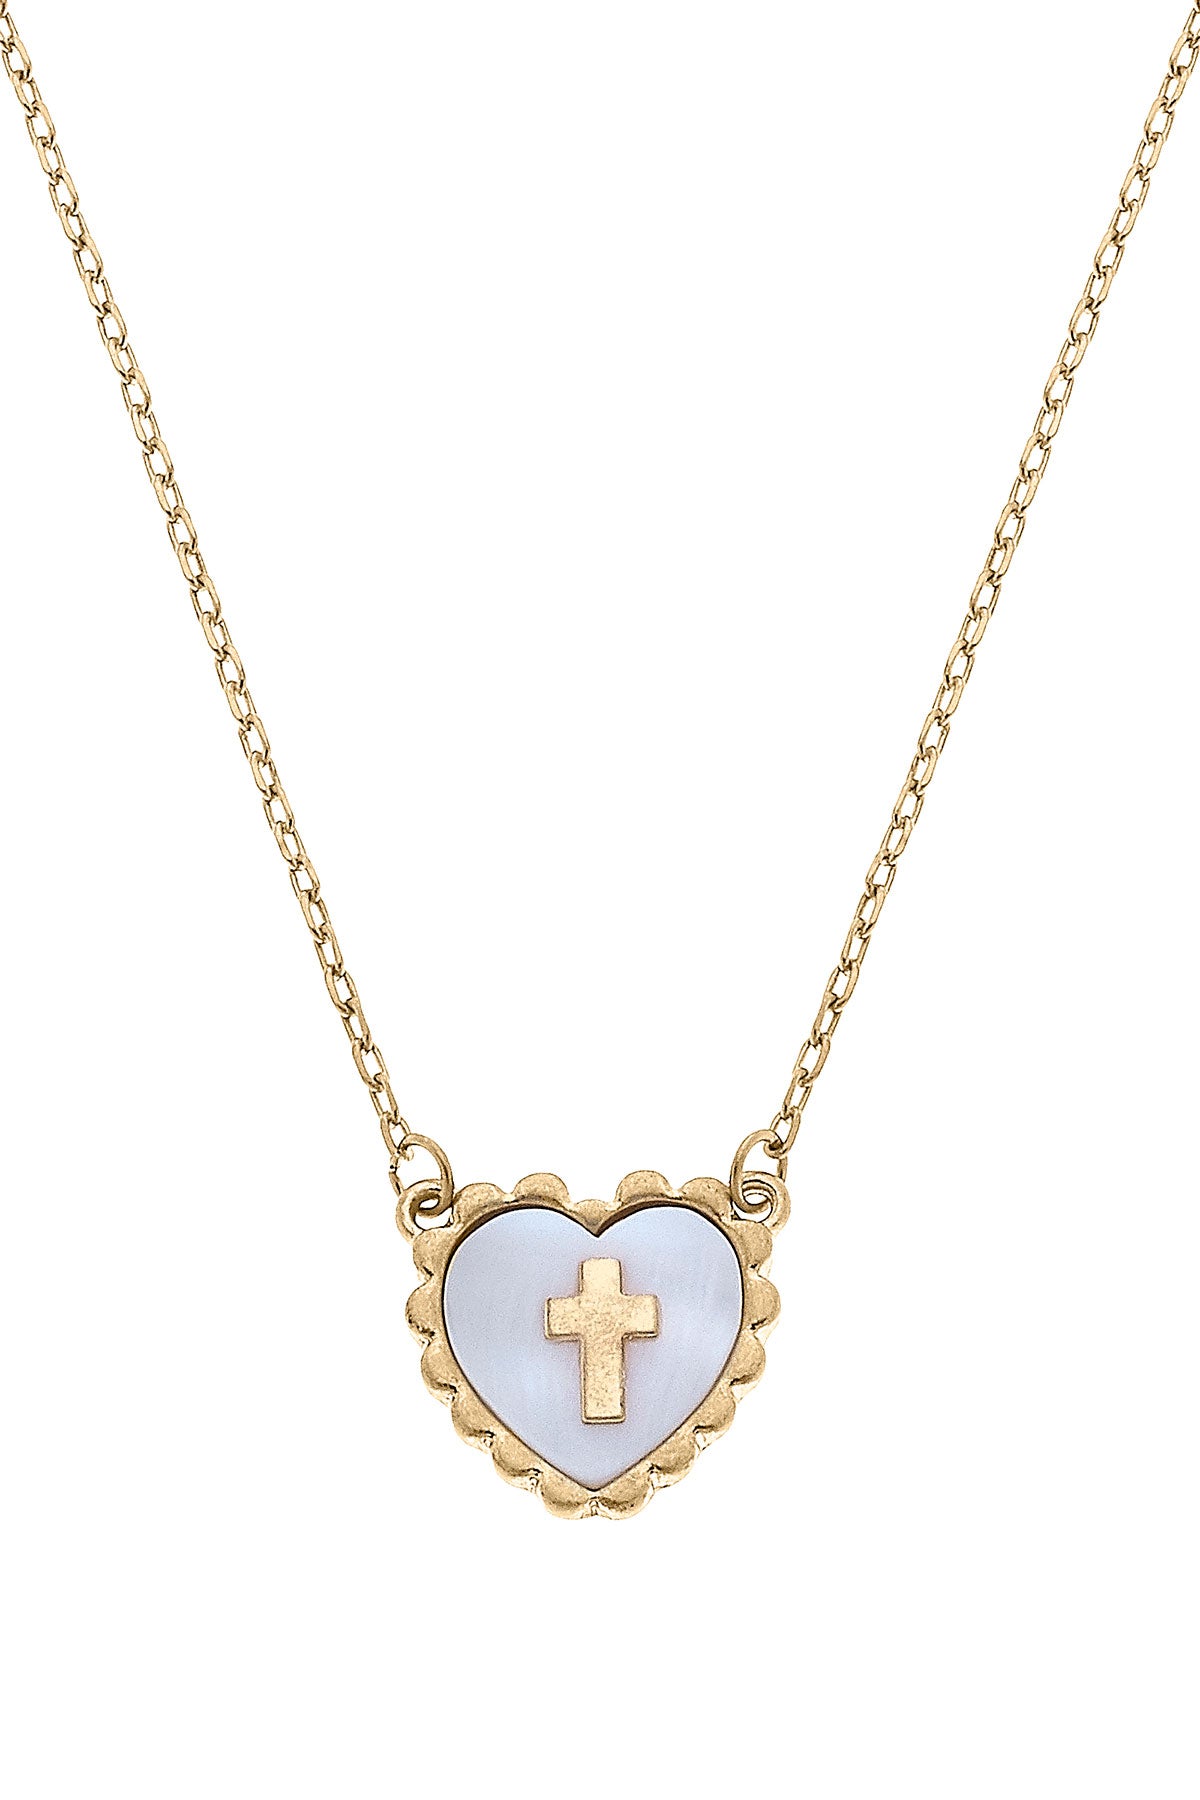 Radiance by Absolute™ Heart Cross Pendant with 19